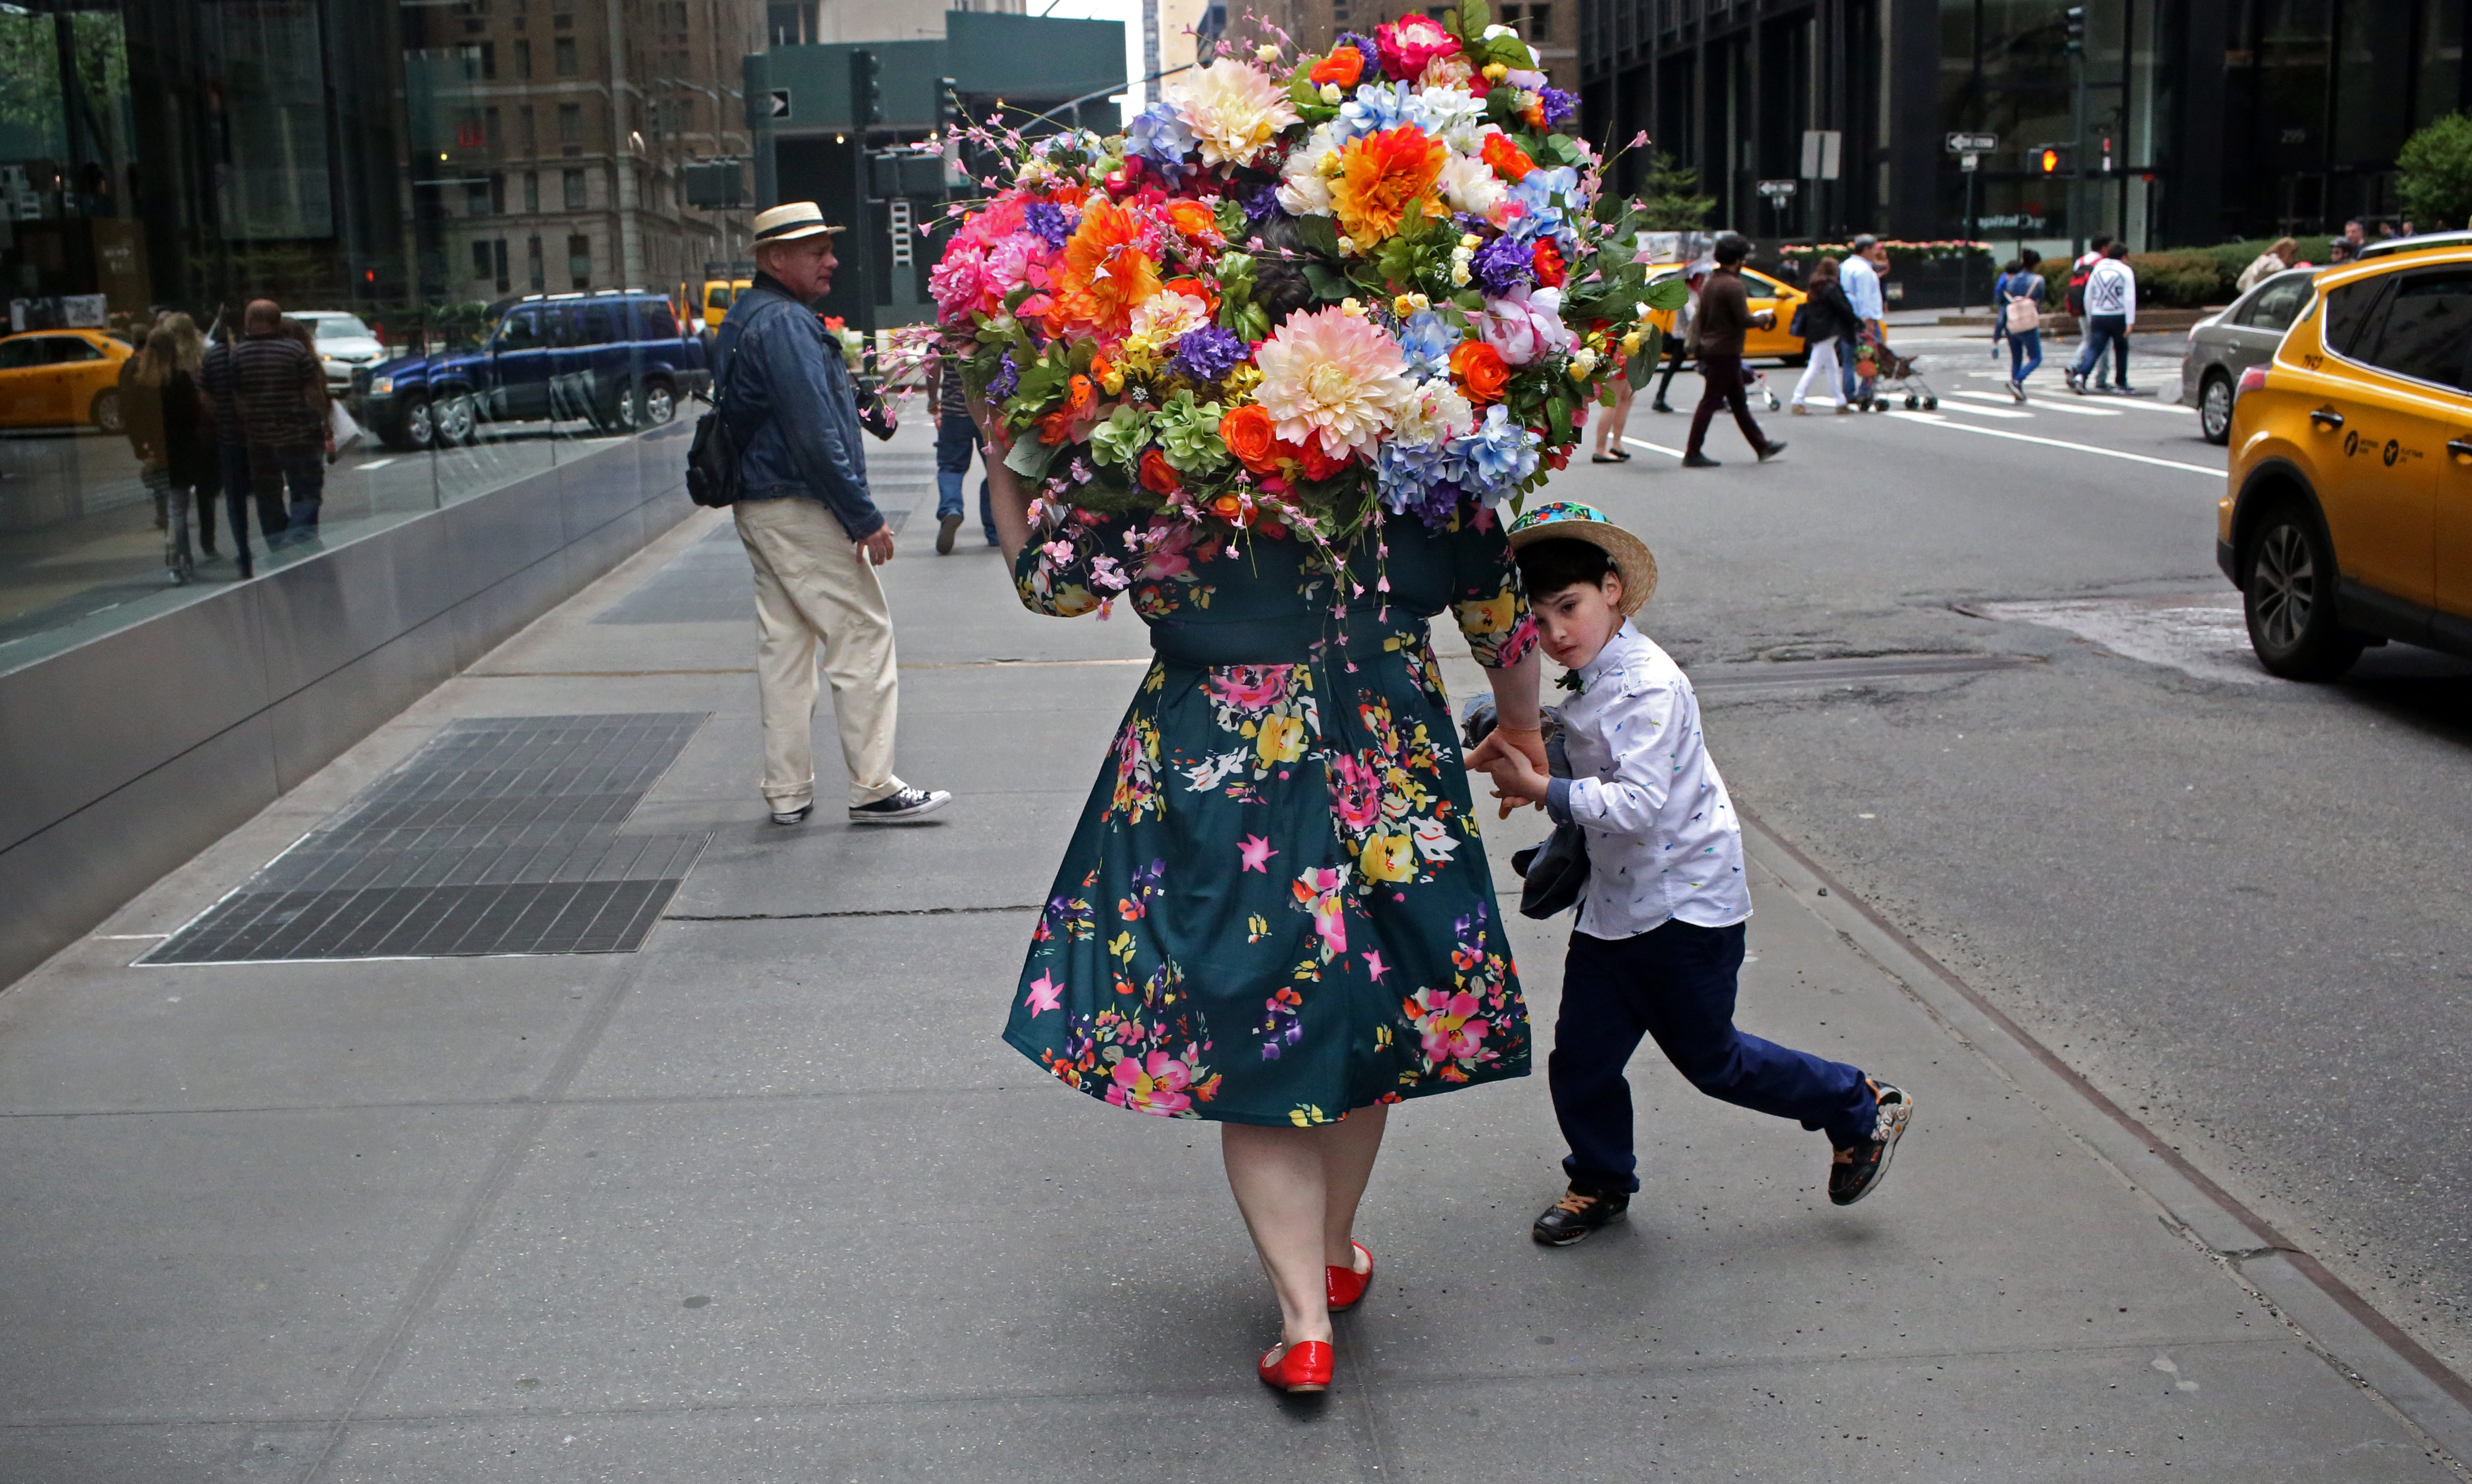 Laura Bopp wears a homemade flower hat while walking with her son Henry King, 7, in Midtown after the annual Easter Parade.